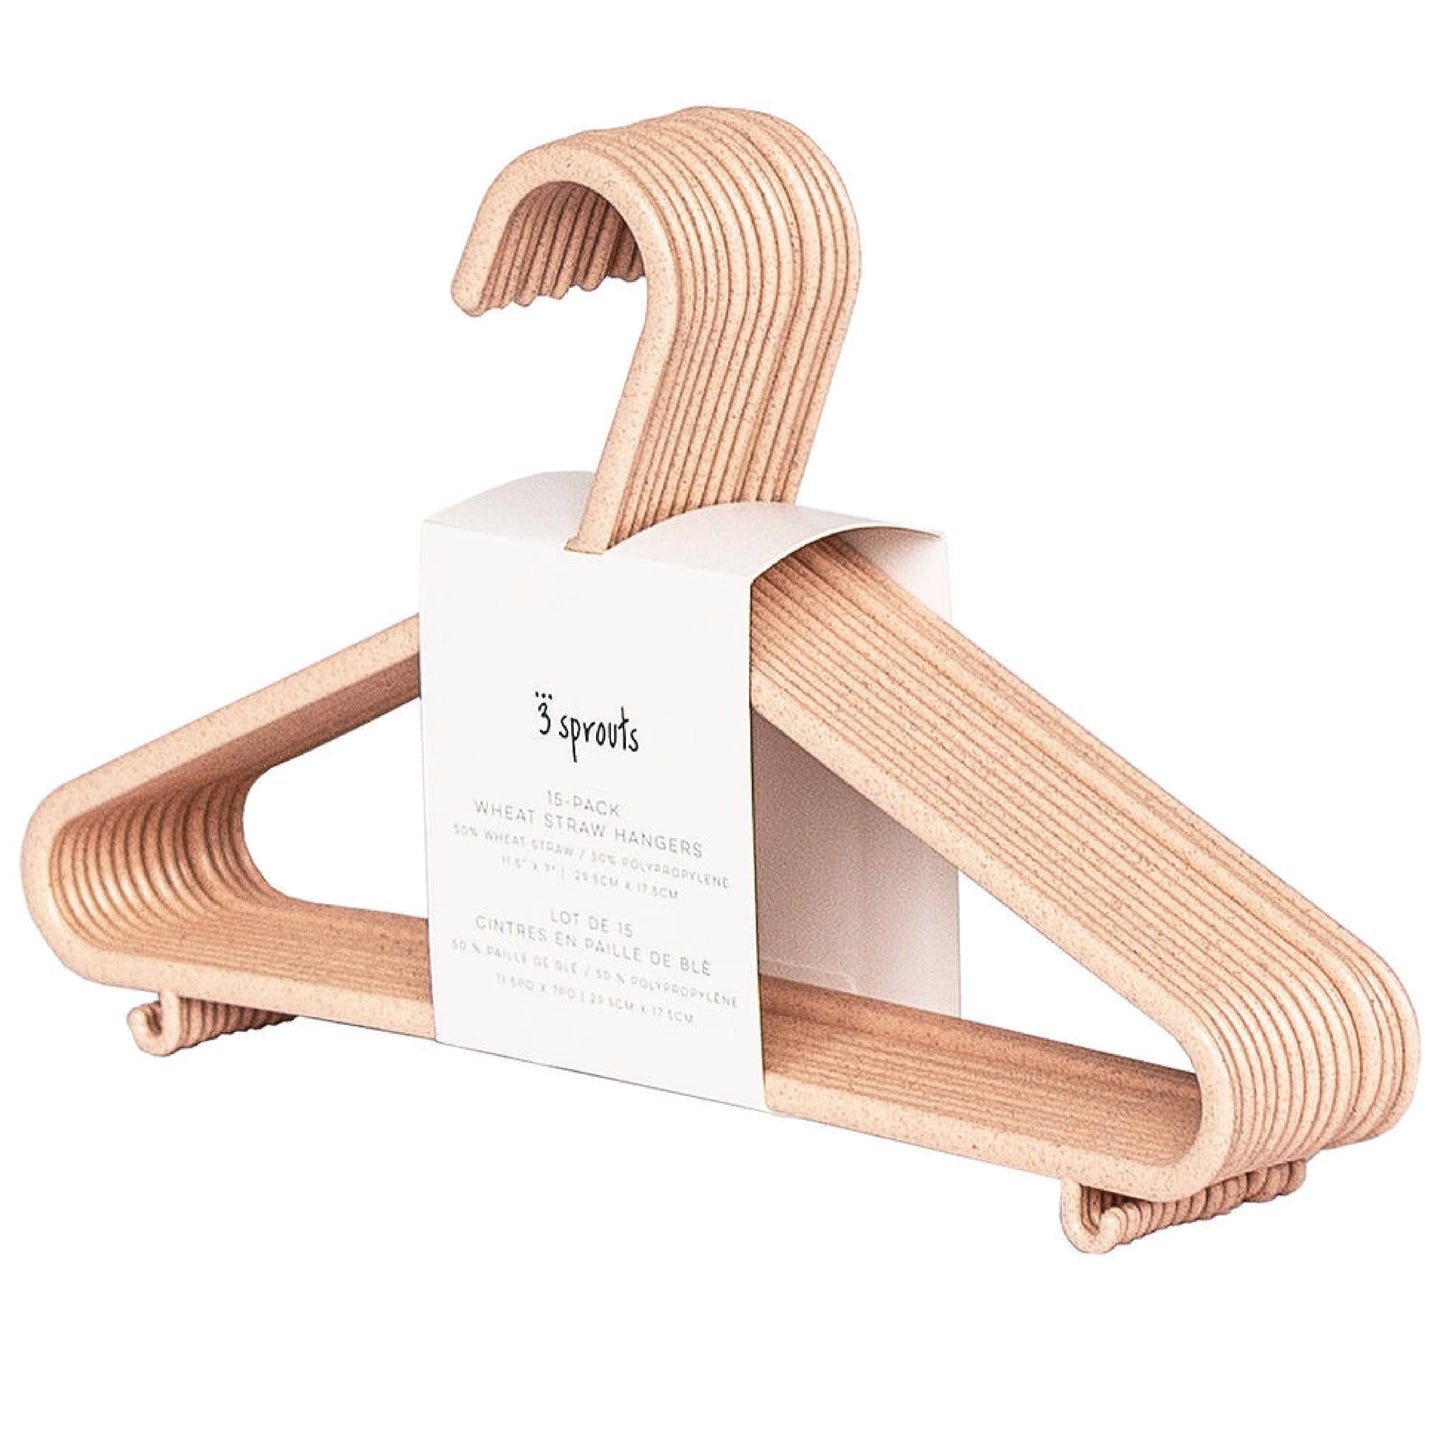 3 Sprouts - Baby Wheat Straw Hangers (Pack of 15)